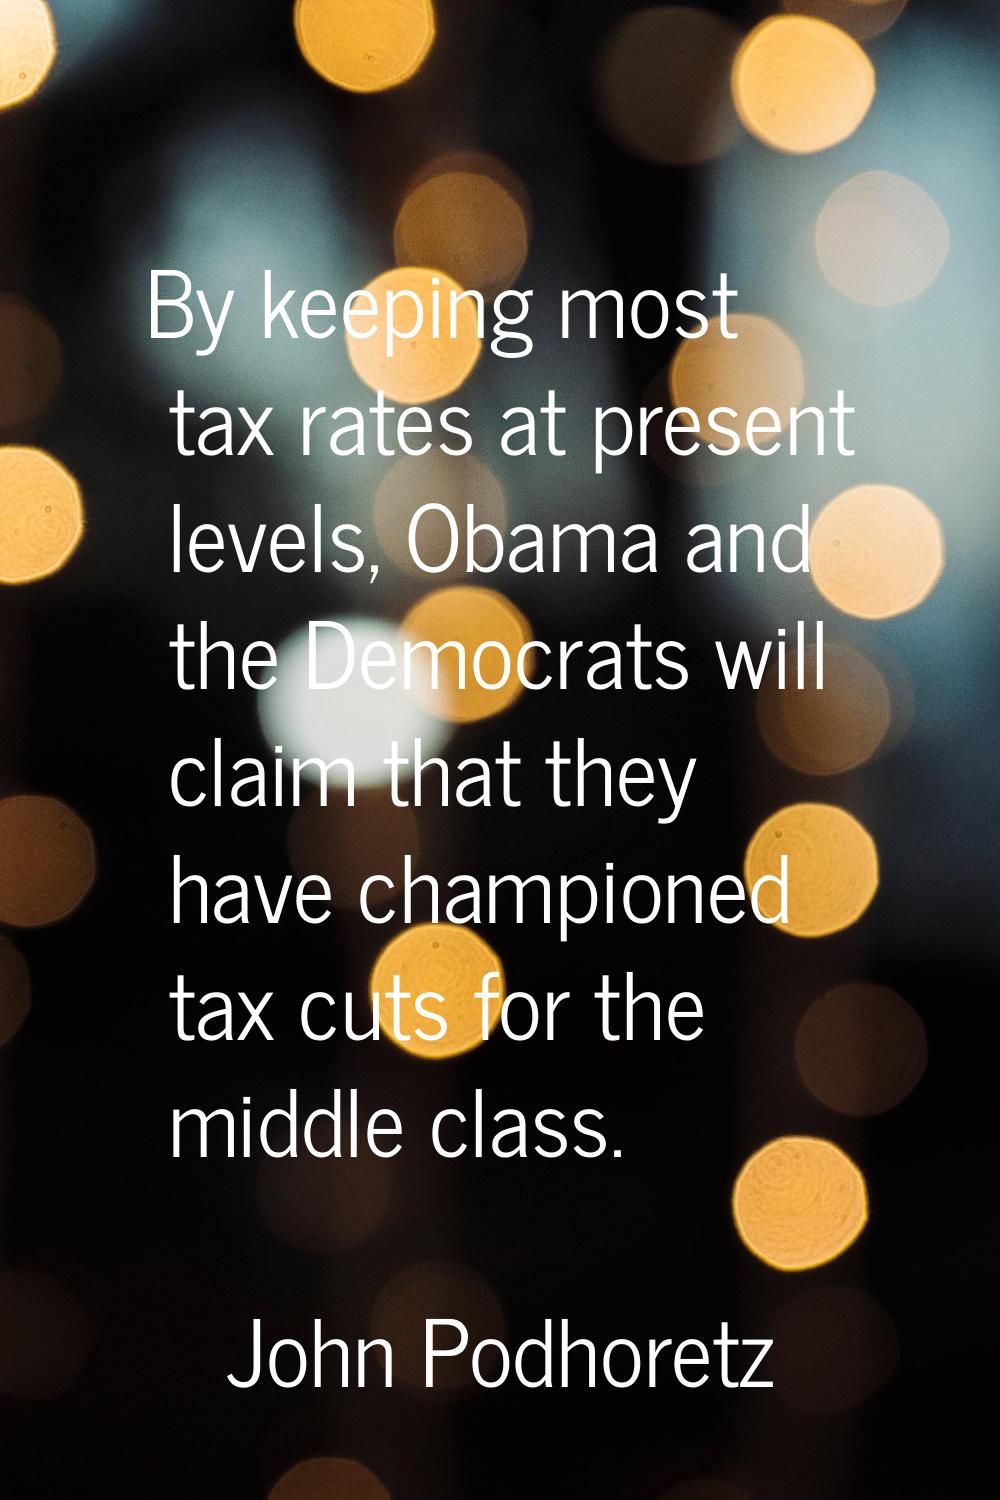 By keeping most tax rates at present levels, Obama and the Democrats will claim that they have cham